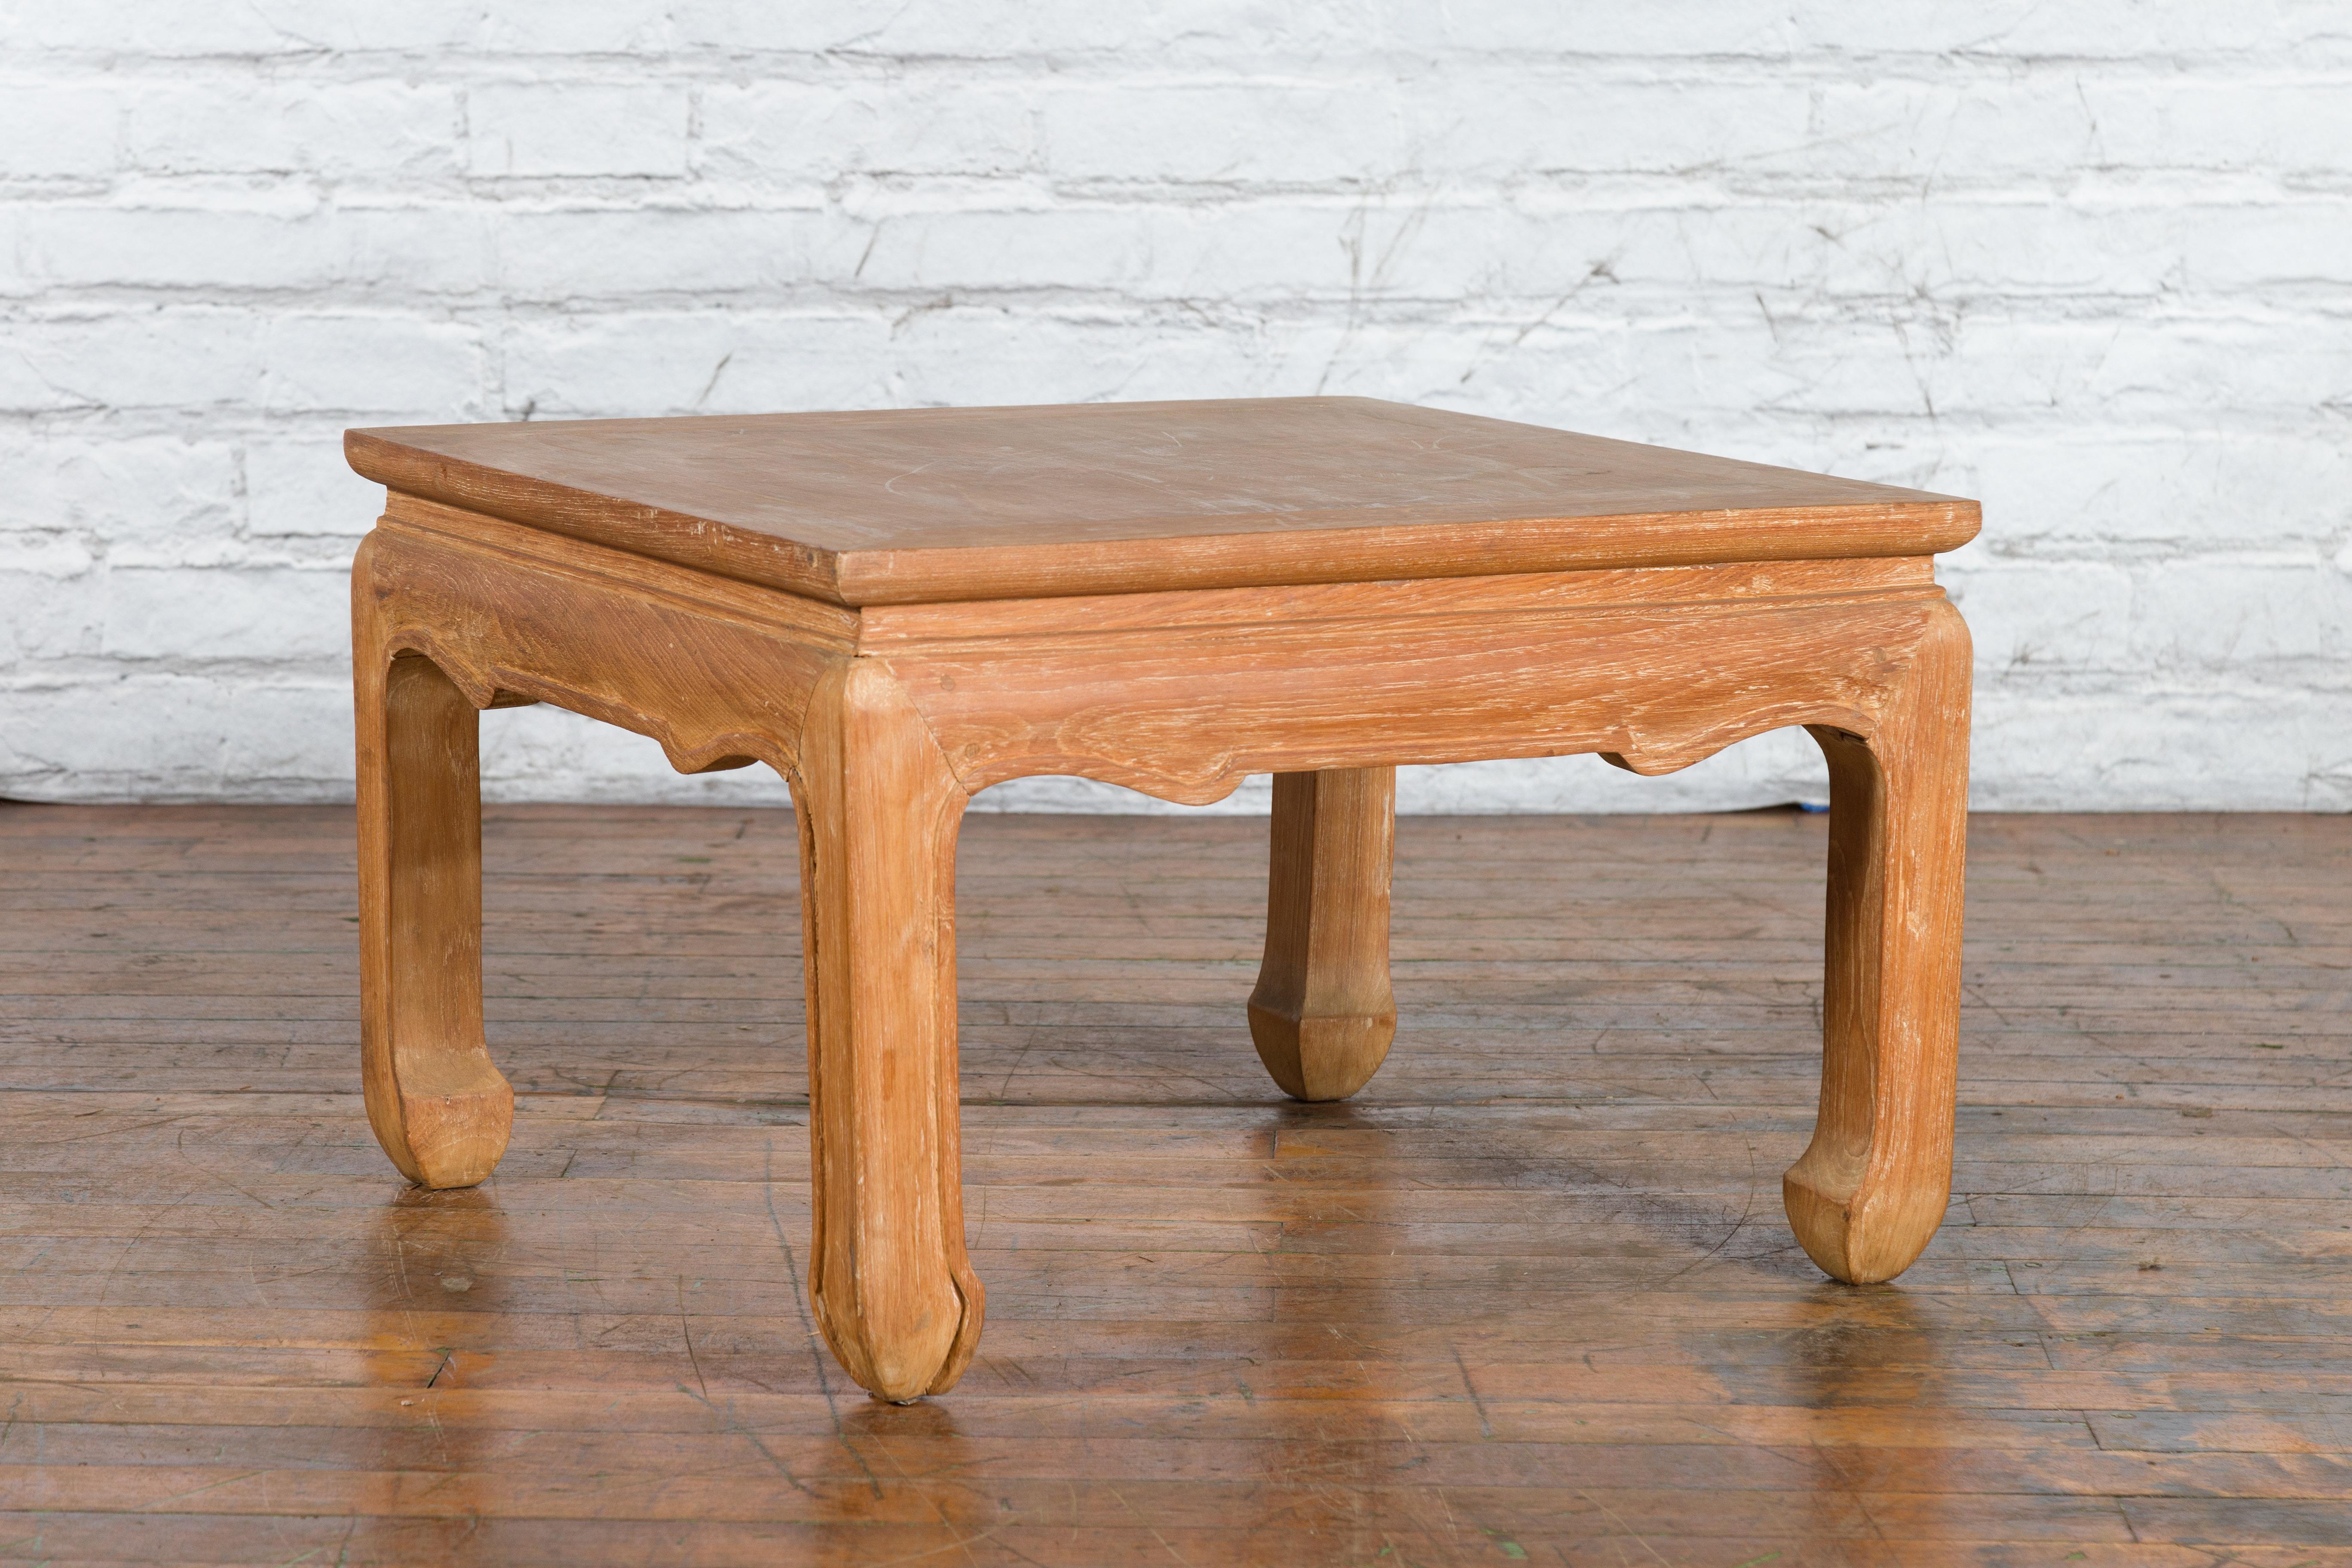 A vintage Ming Dynasty style Thai teak wood low drinks table from the mid-20th century with natural patina, carved apron and horse hoof extremities. Created in Thailand during the Midcentury period, this Chinese Ming Dynasty style teak wood drinks